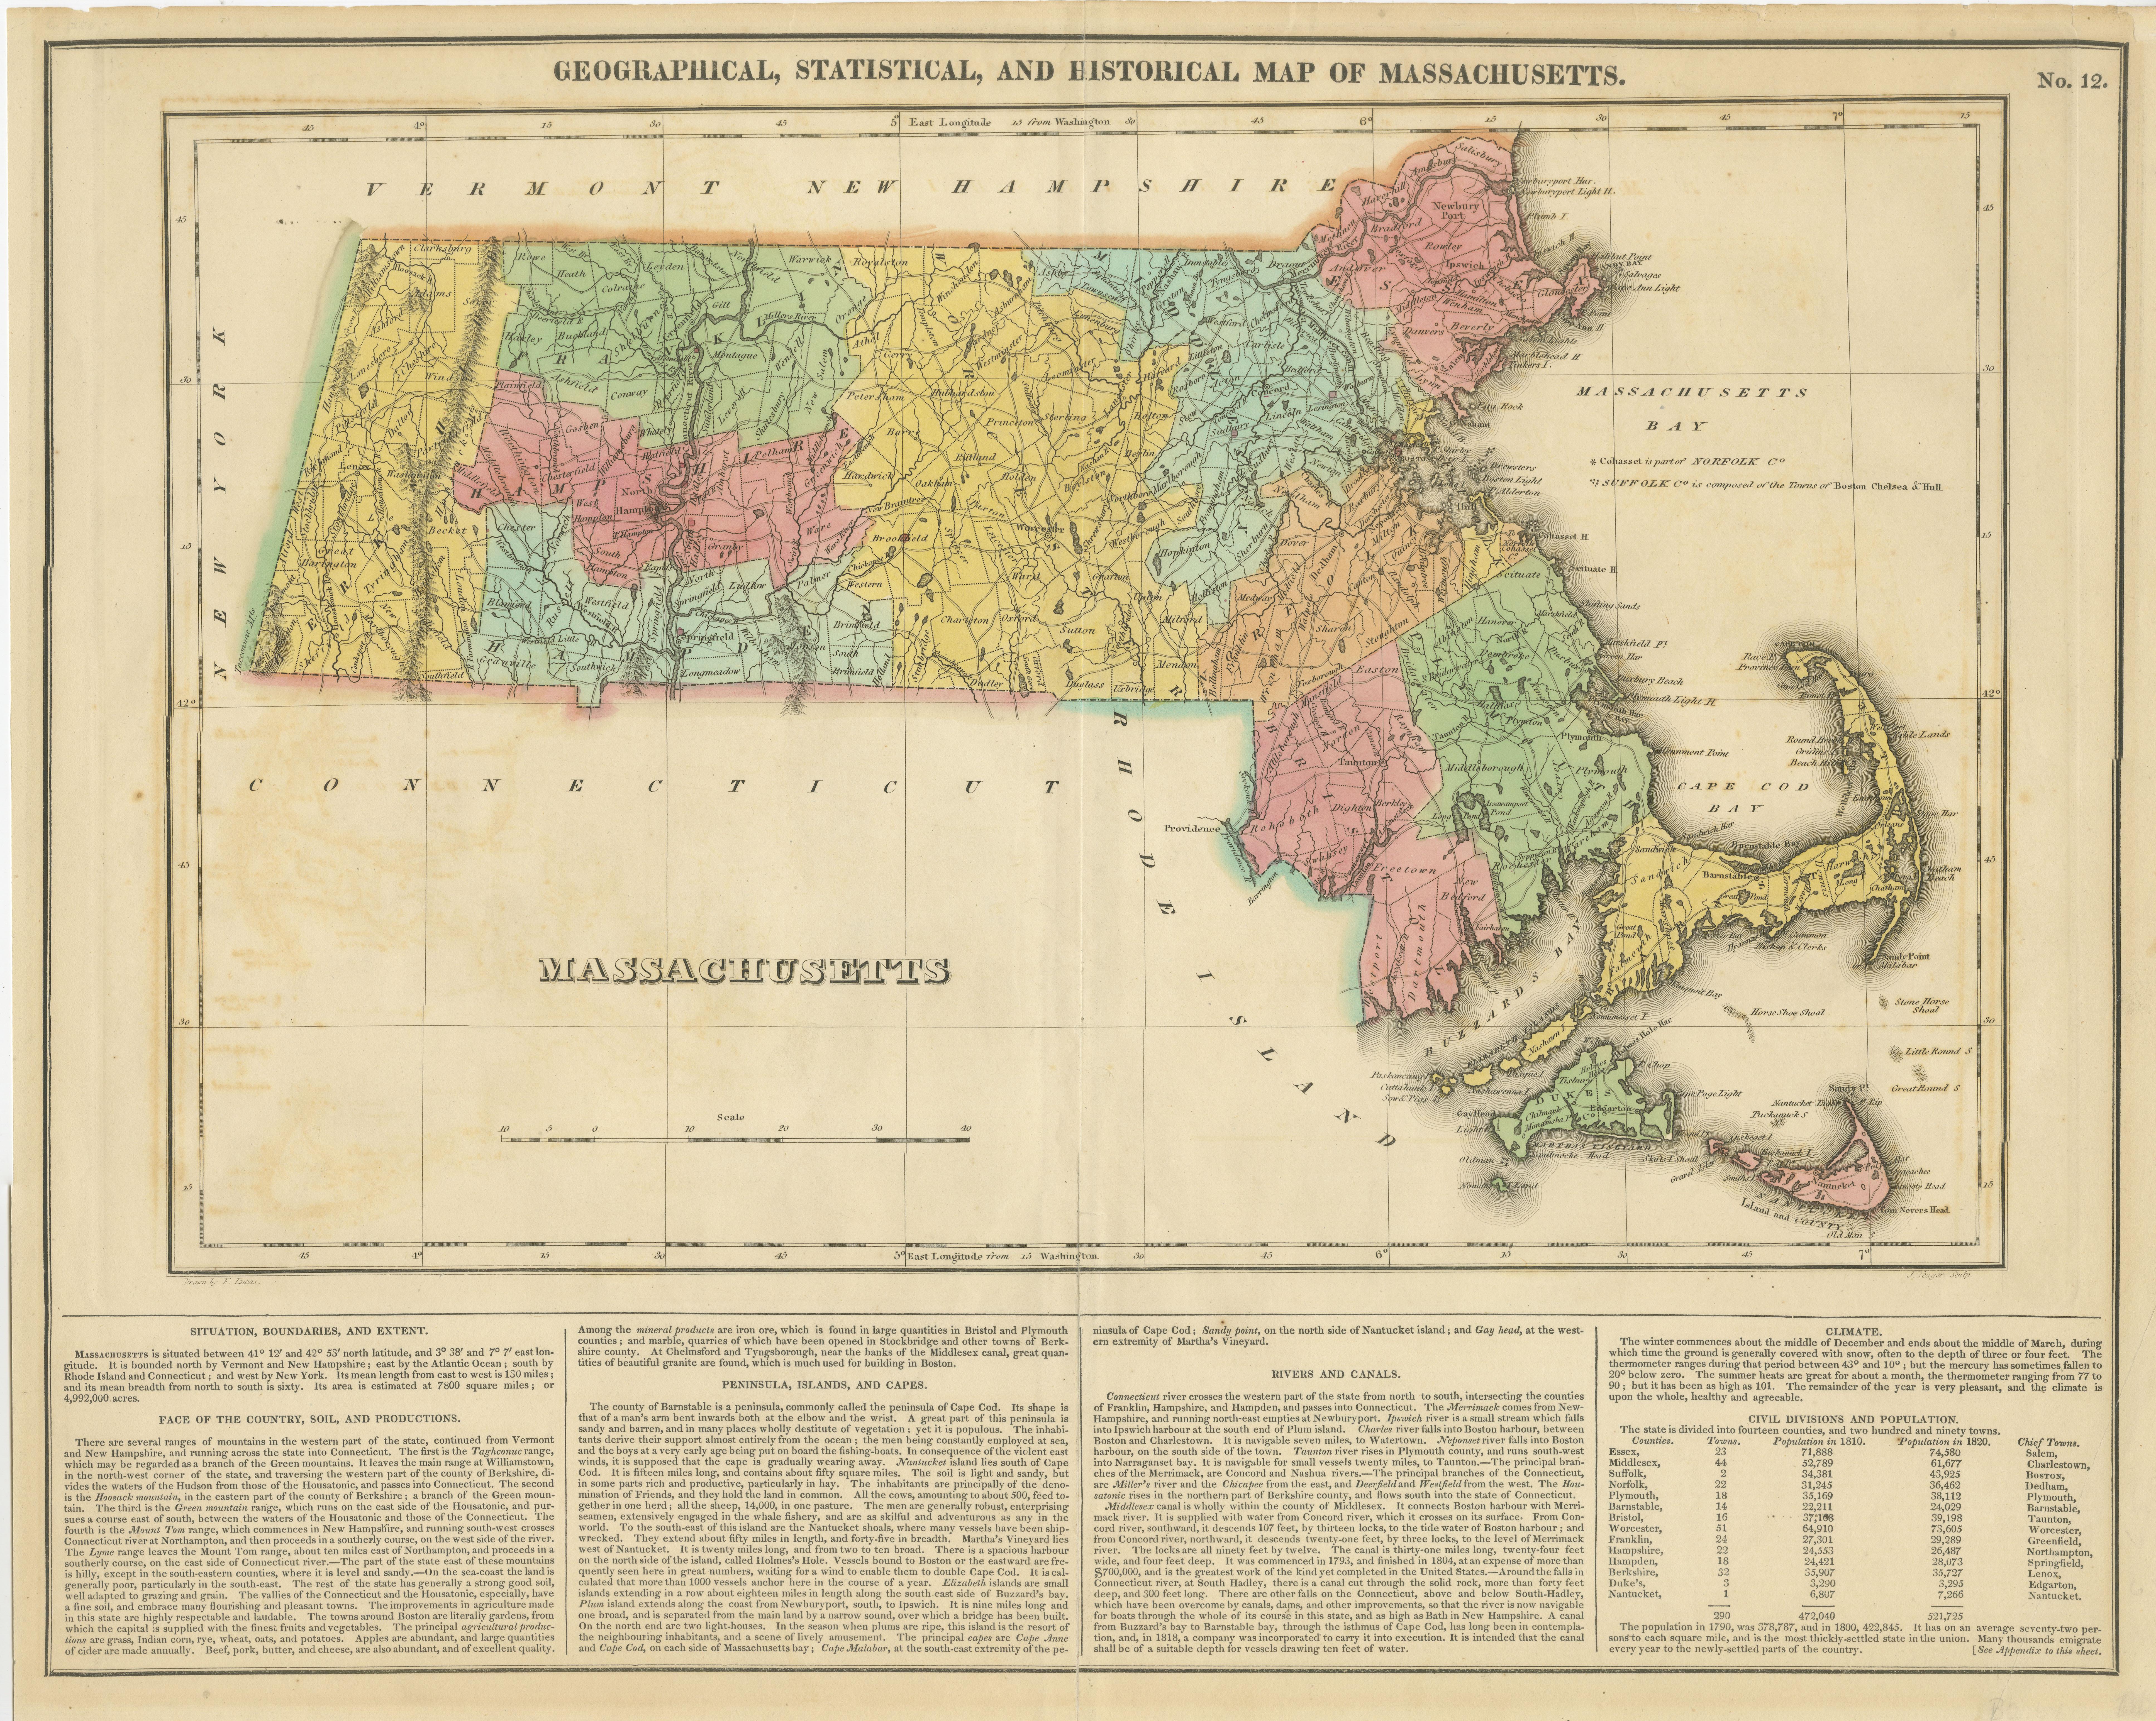 This attractive map of Massachusetts presents a finely detailed overview of the state in the first quarter of the 19th century.

Transportation routes (mostly unpaved postal routes) can be seen serving largely agrarian communities, many of which